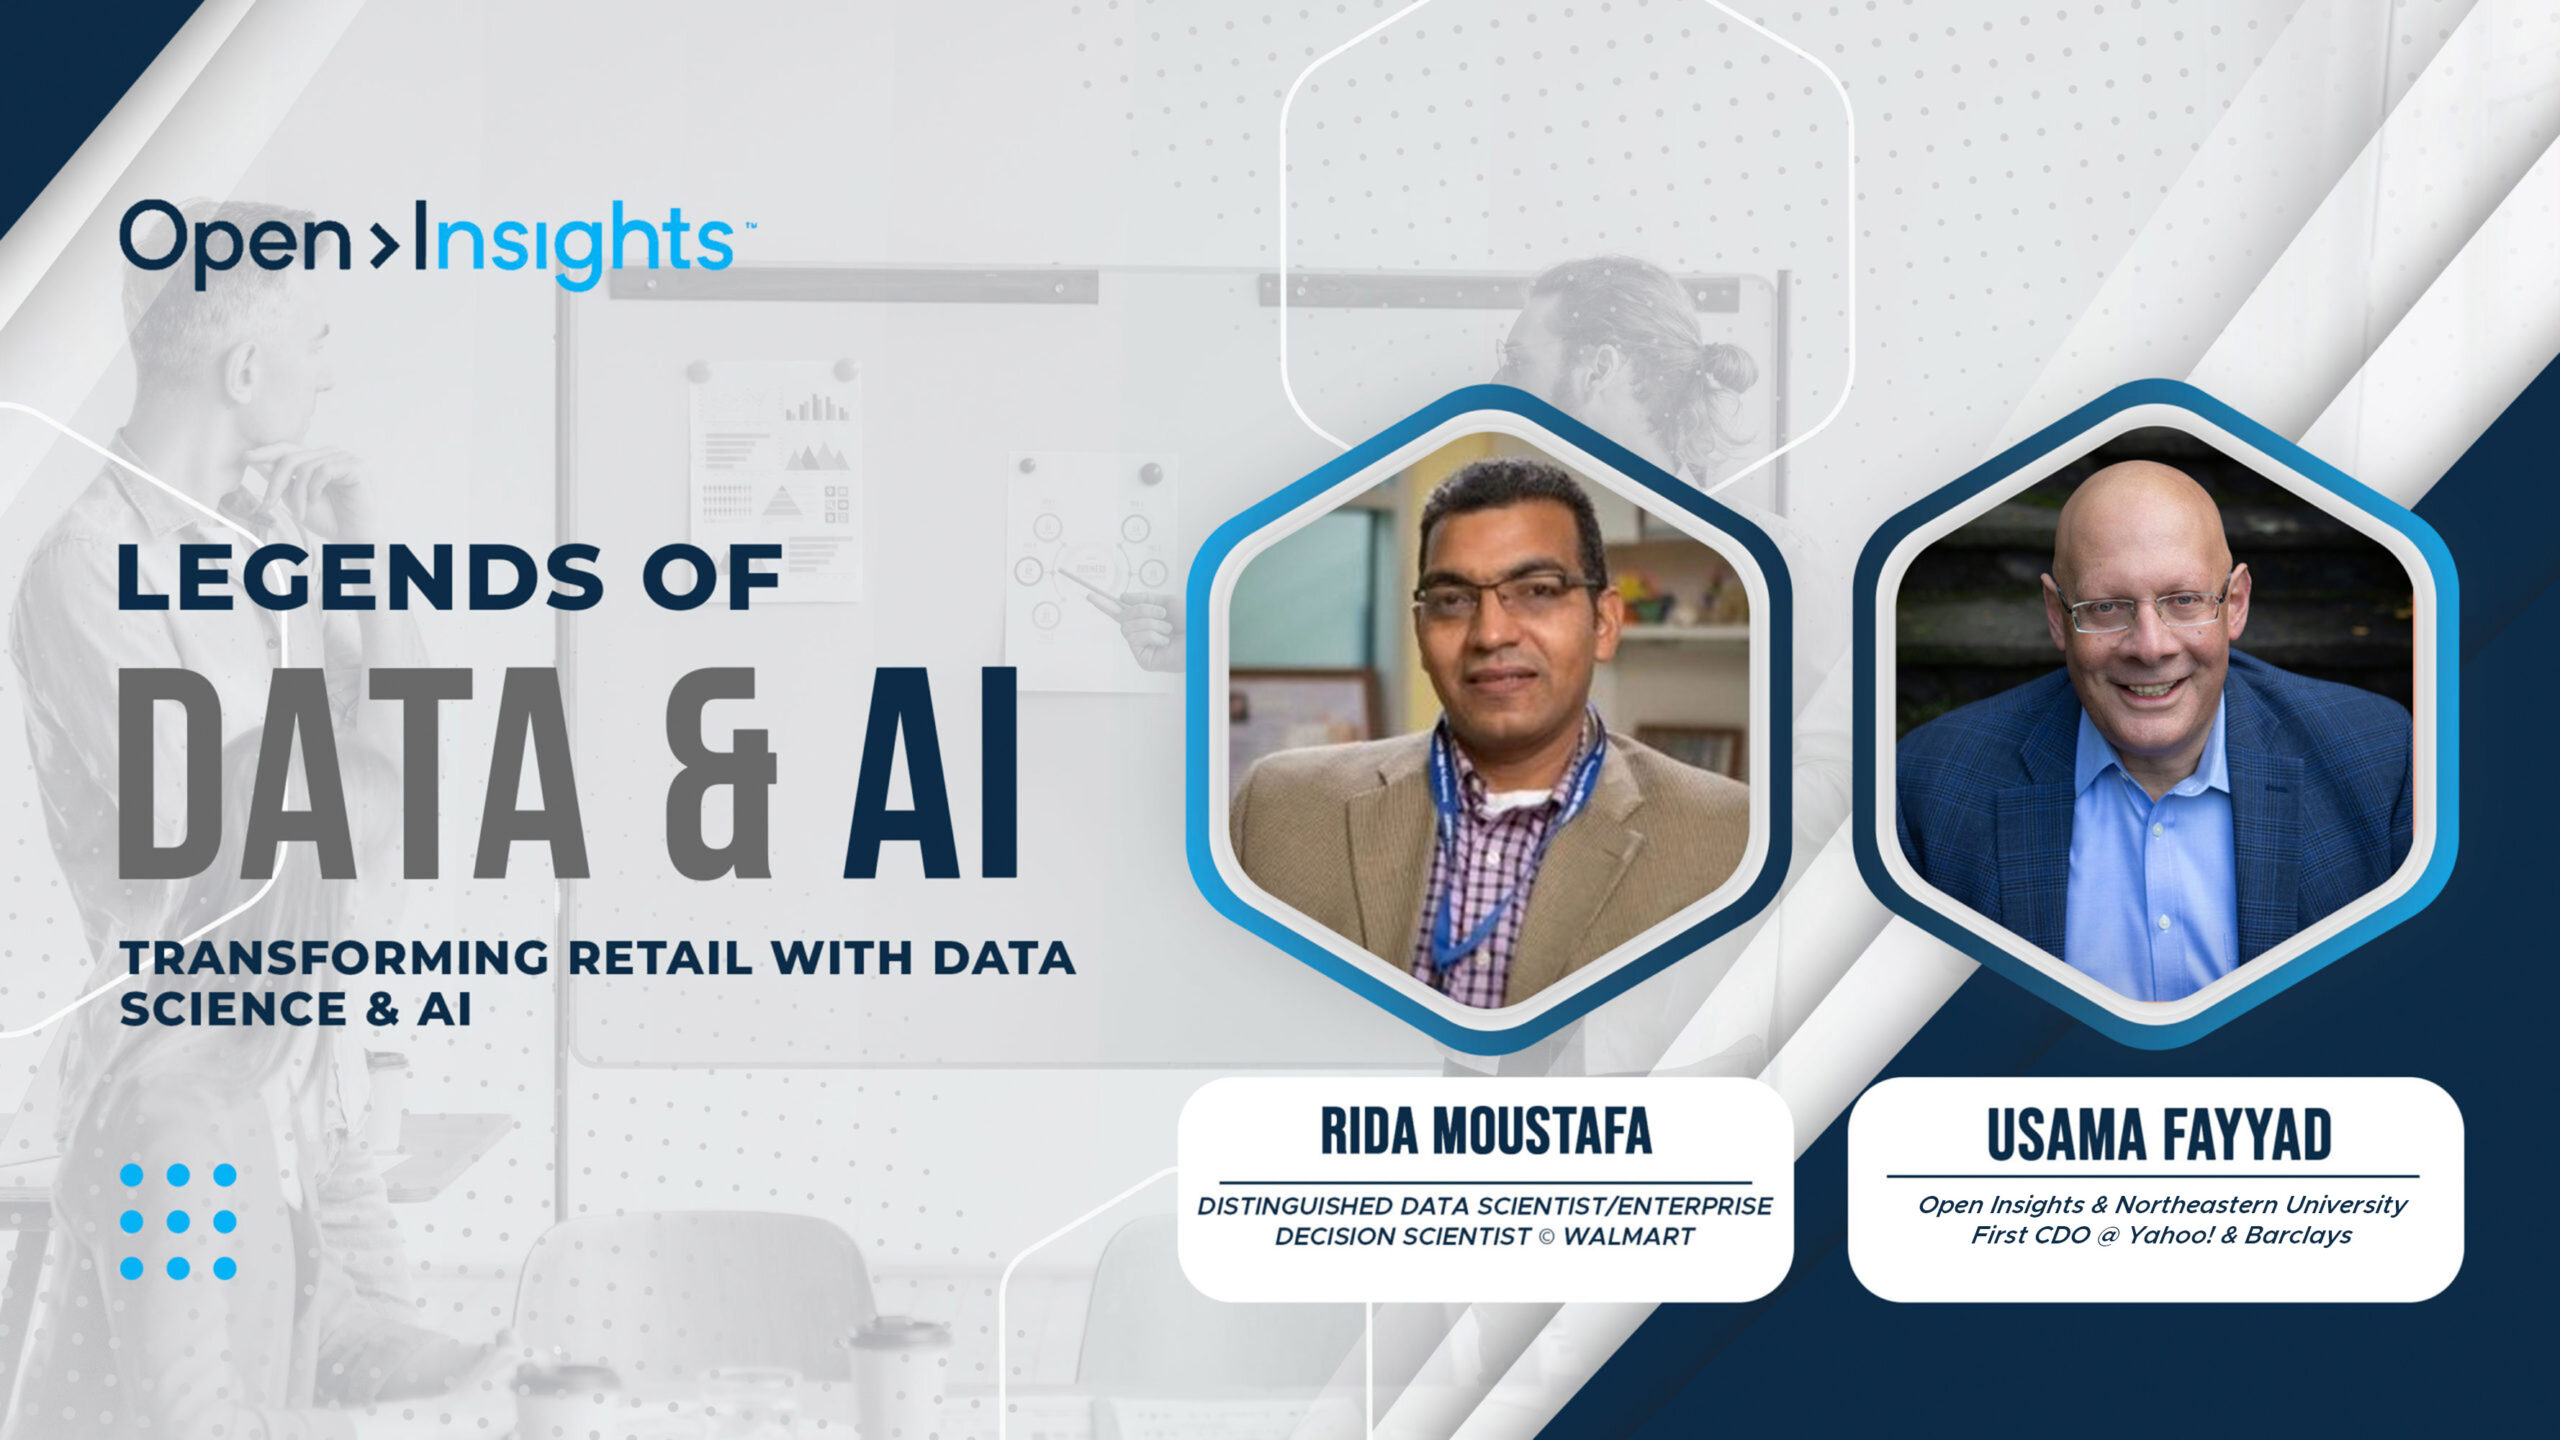 Transforming retail with data science & AI